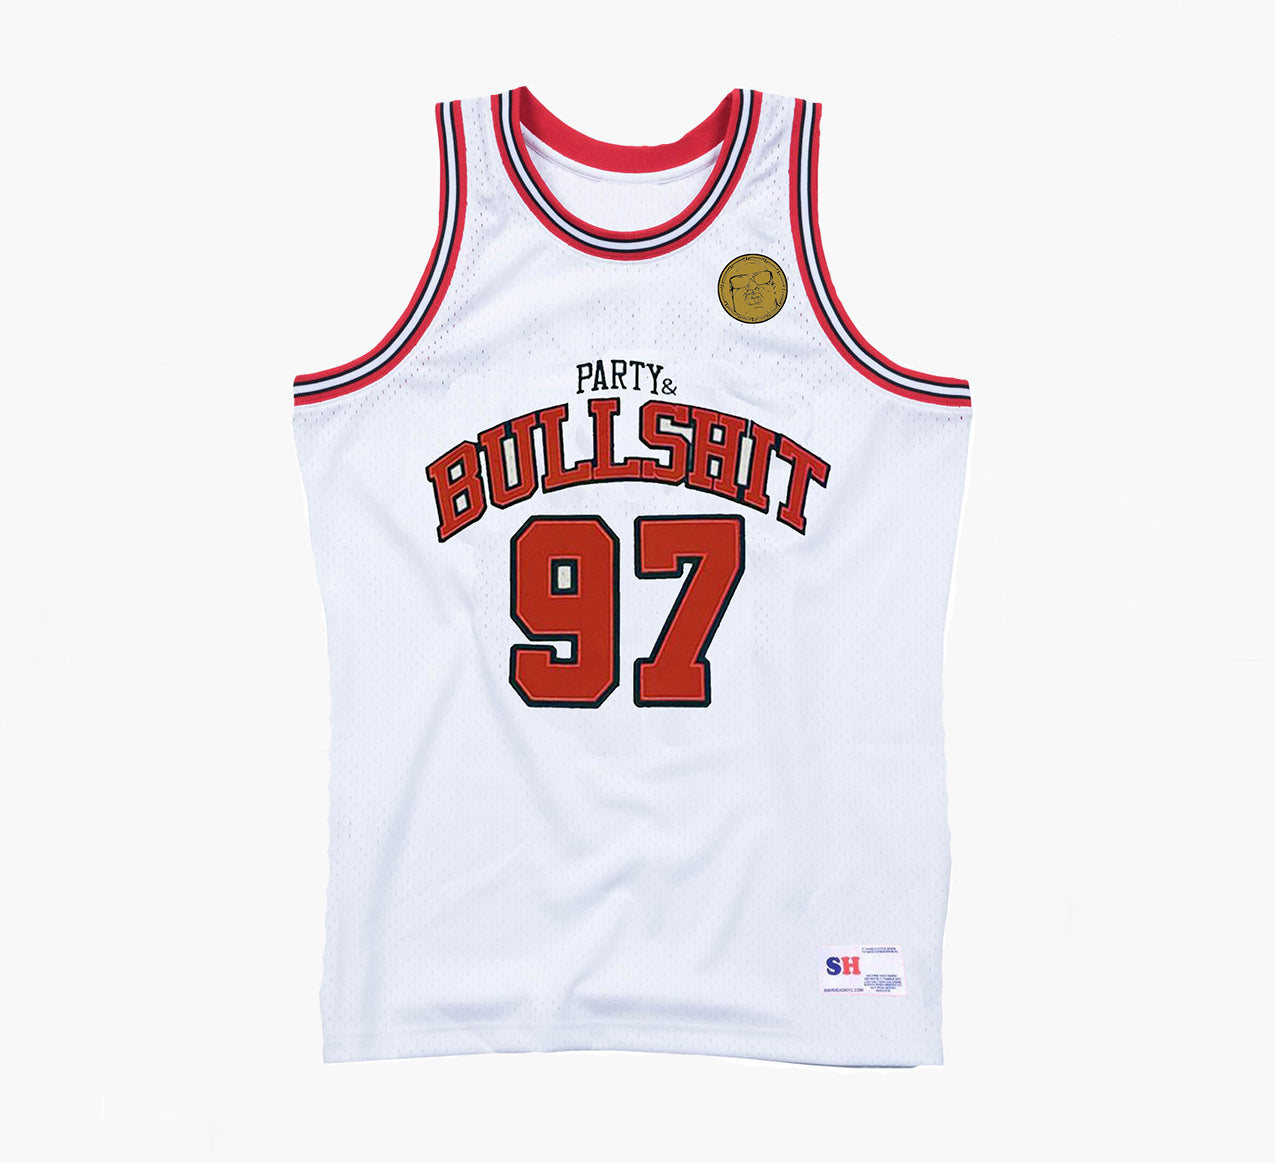 PARTY AND BULLSH*T White Jersey